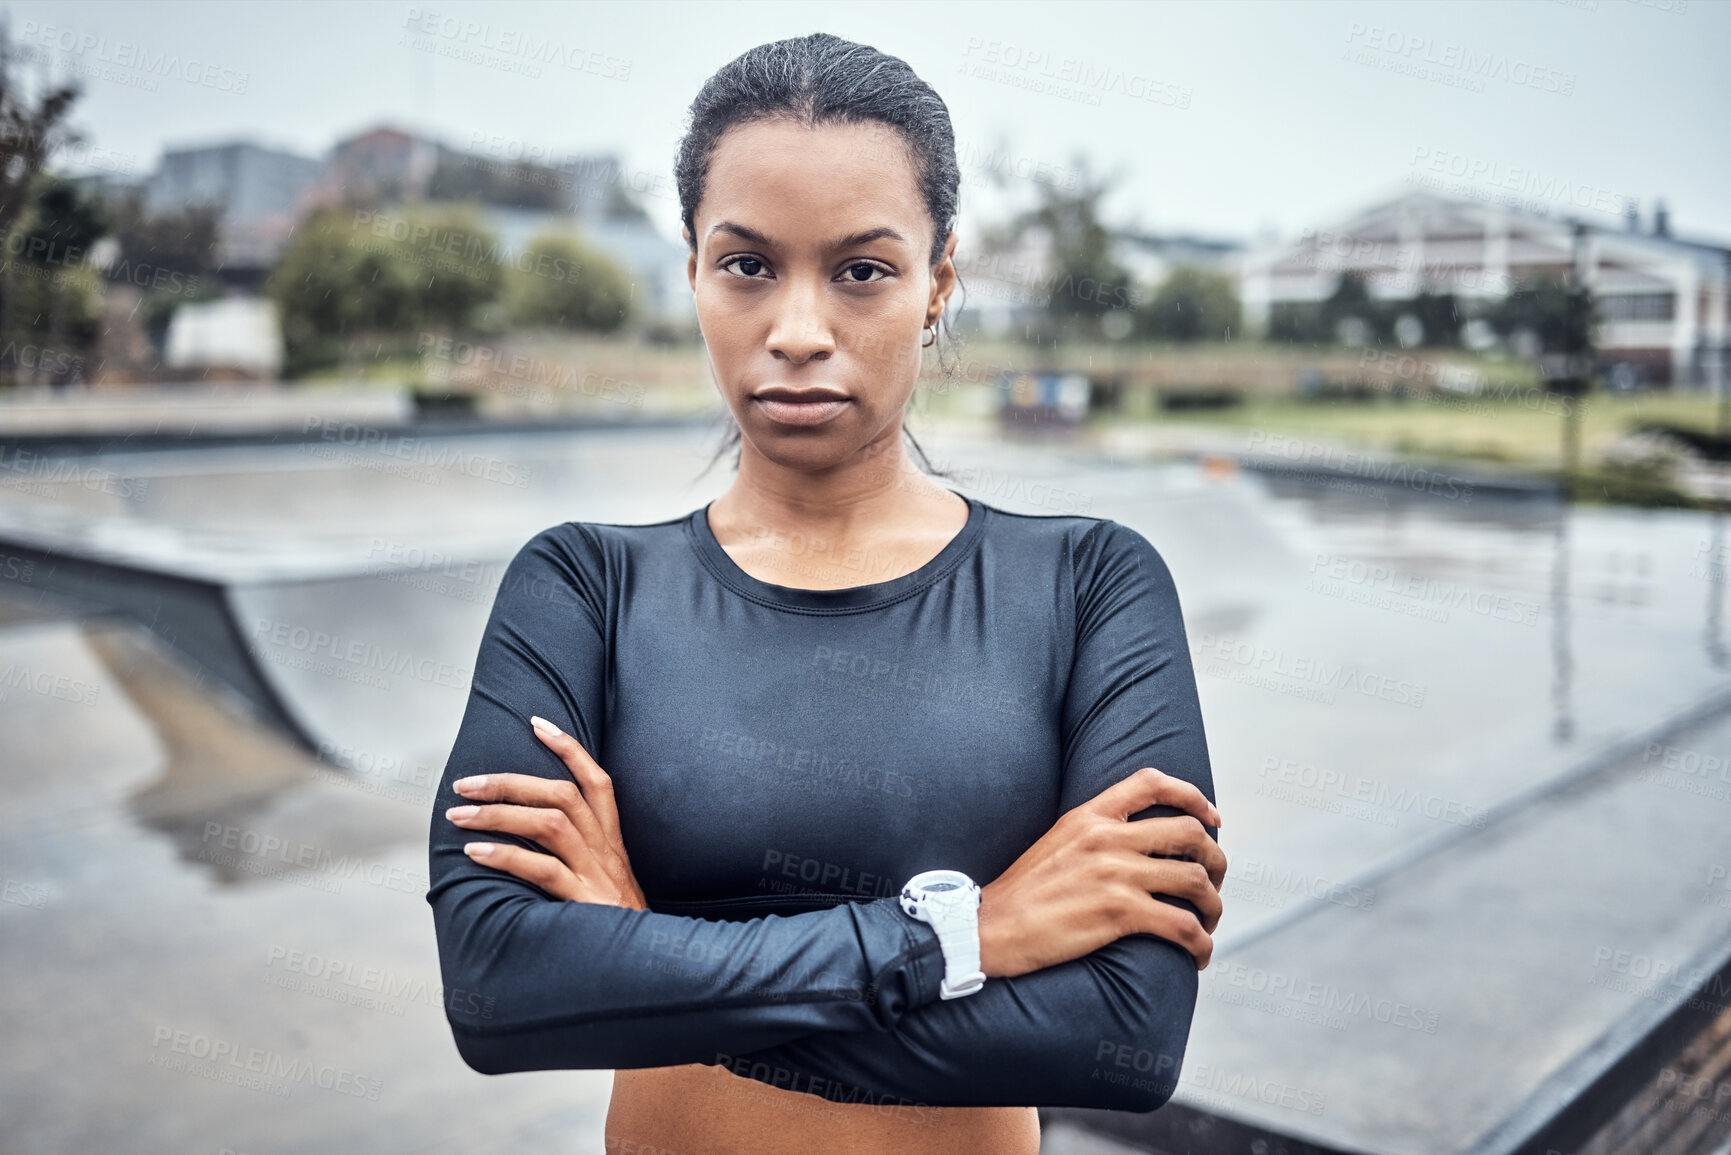 Buy stock photo Fitness, sports and portrait of a woman in the city for an outdoor run, exercise or training. Serious, motivation and young female athlete or runner with crossed arms after a cardio workout outside.